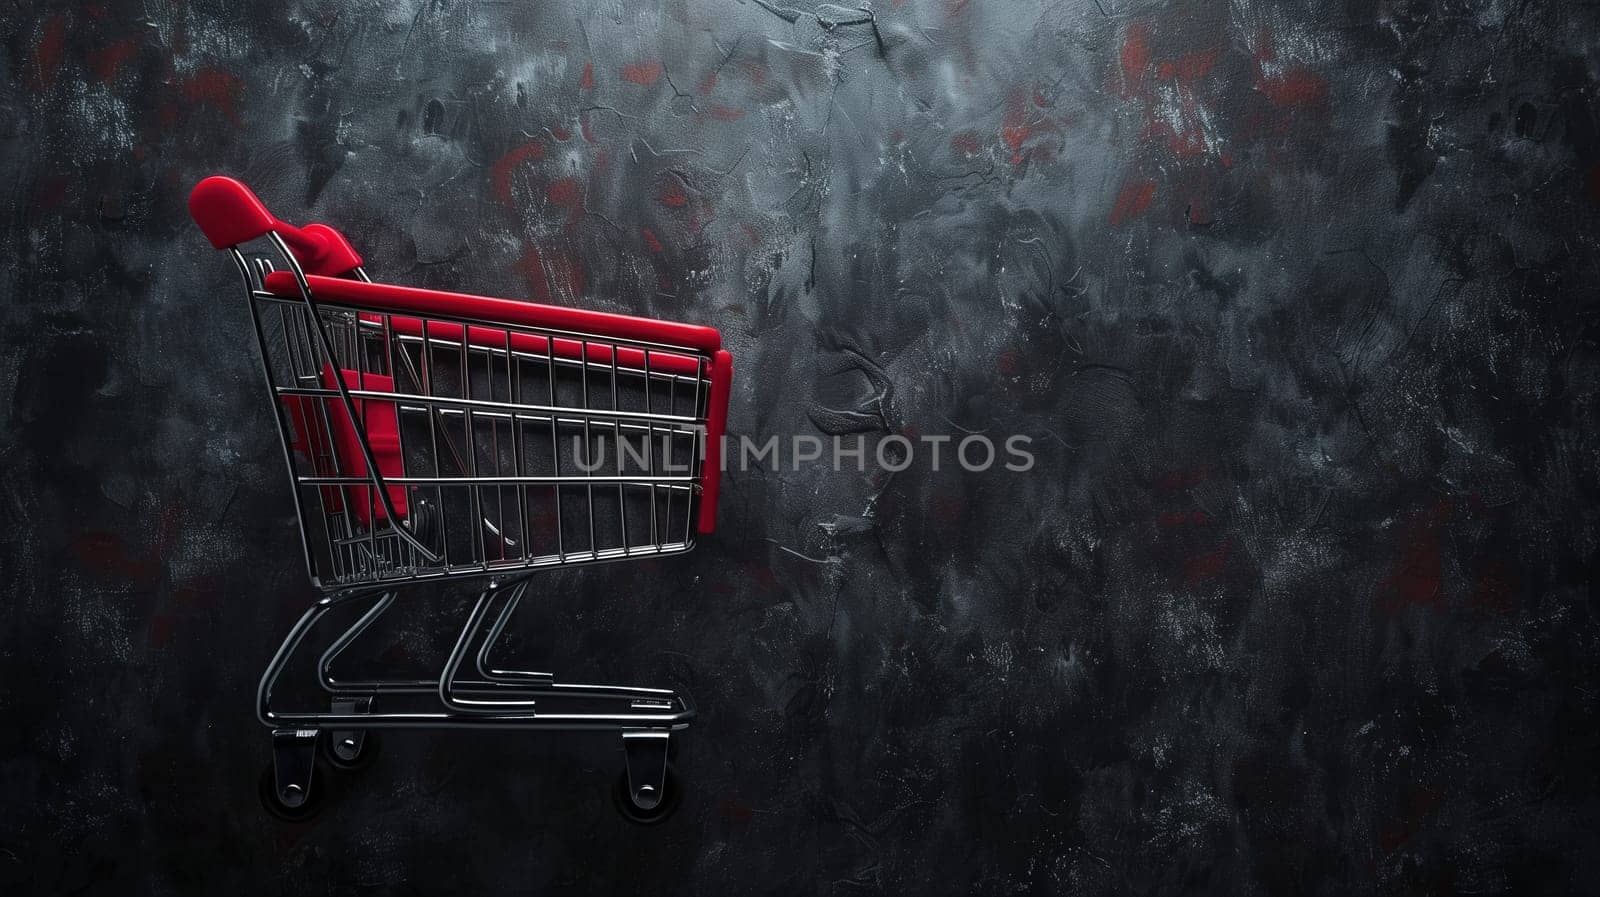 A red shopping cart is parked in front of a plain wall, symbolizing a sale concept or Black Friday shopping. The cart stands out against the backdrop, creating a simple yet striking image.